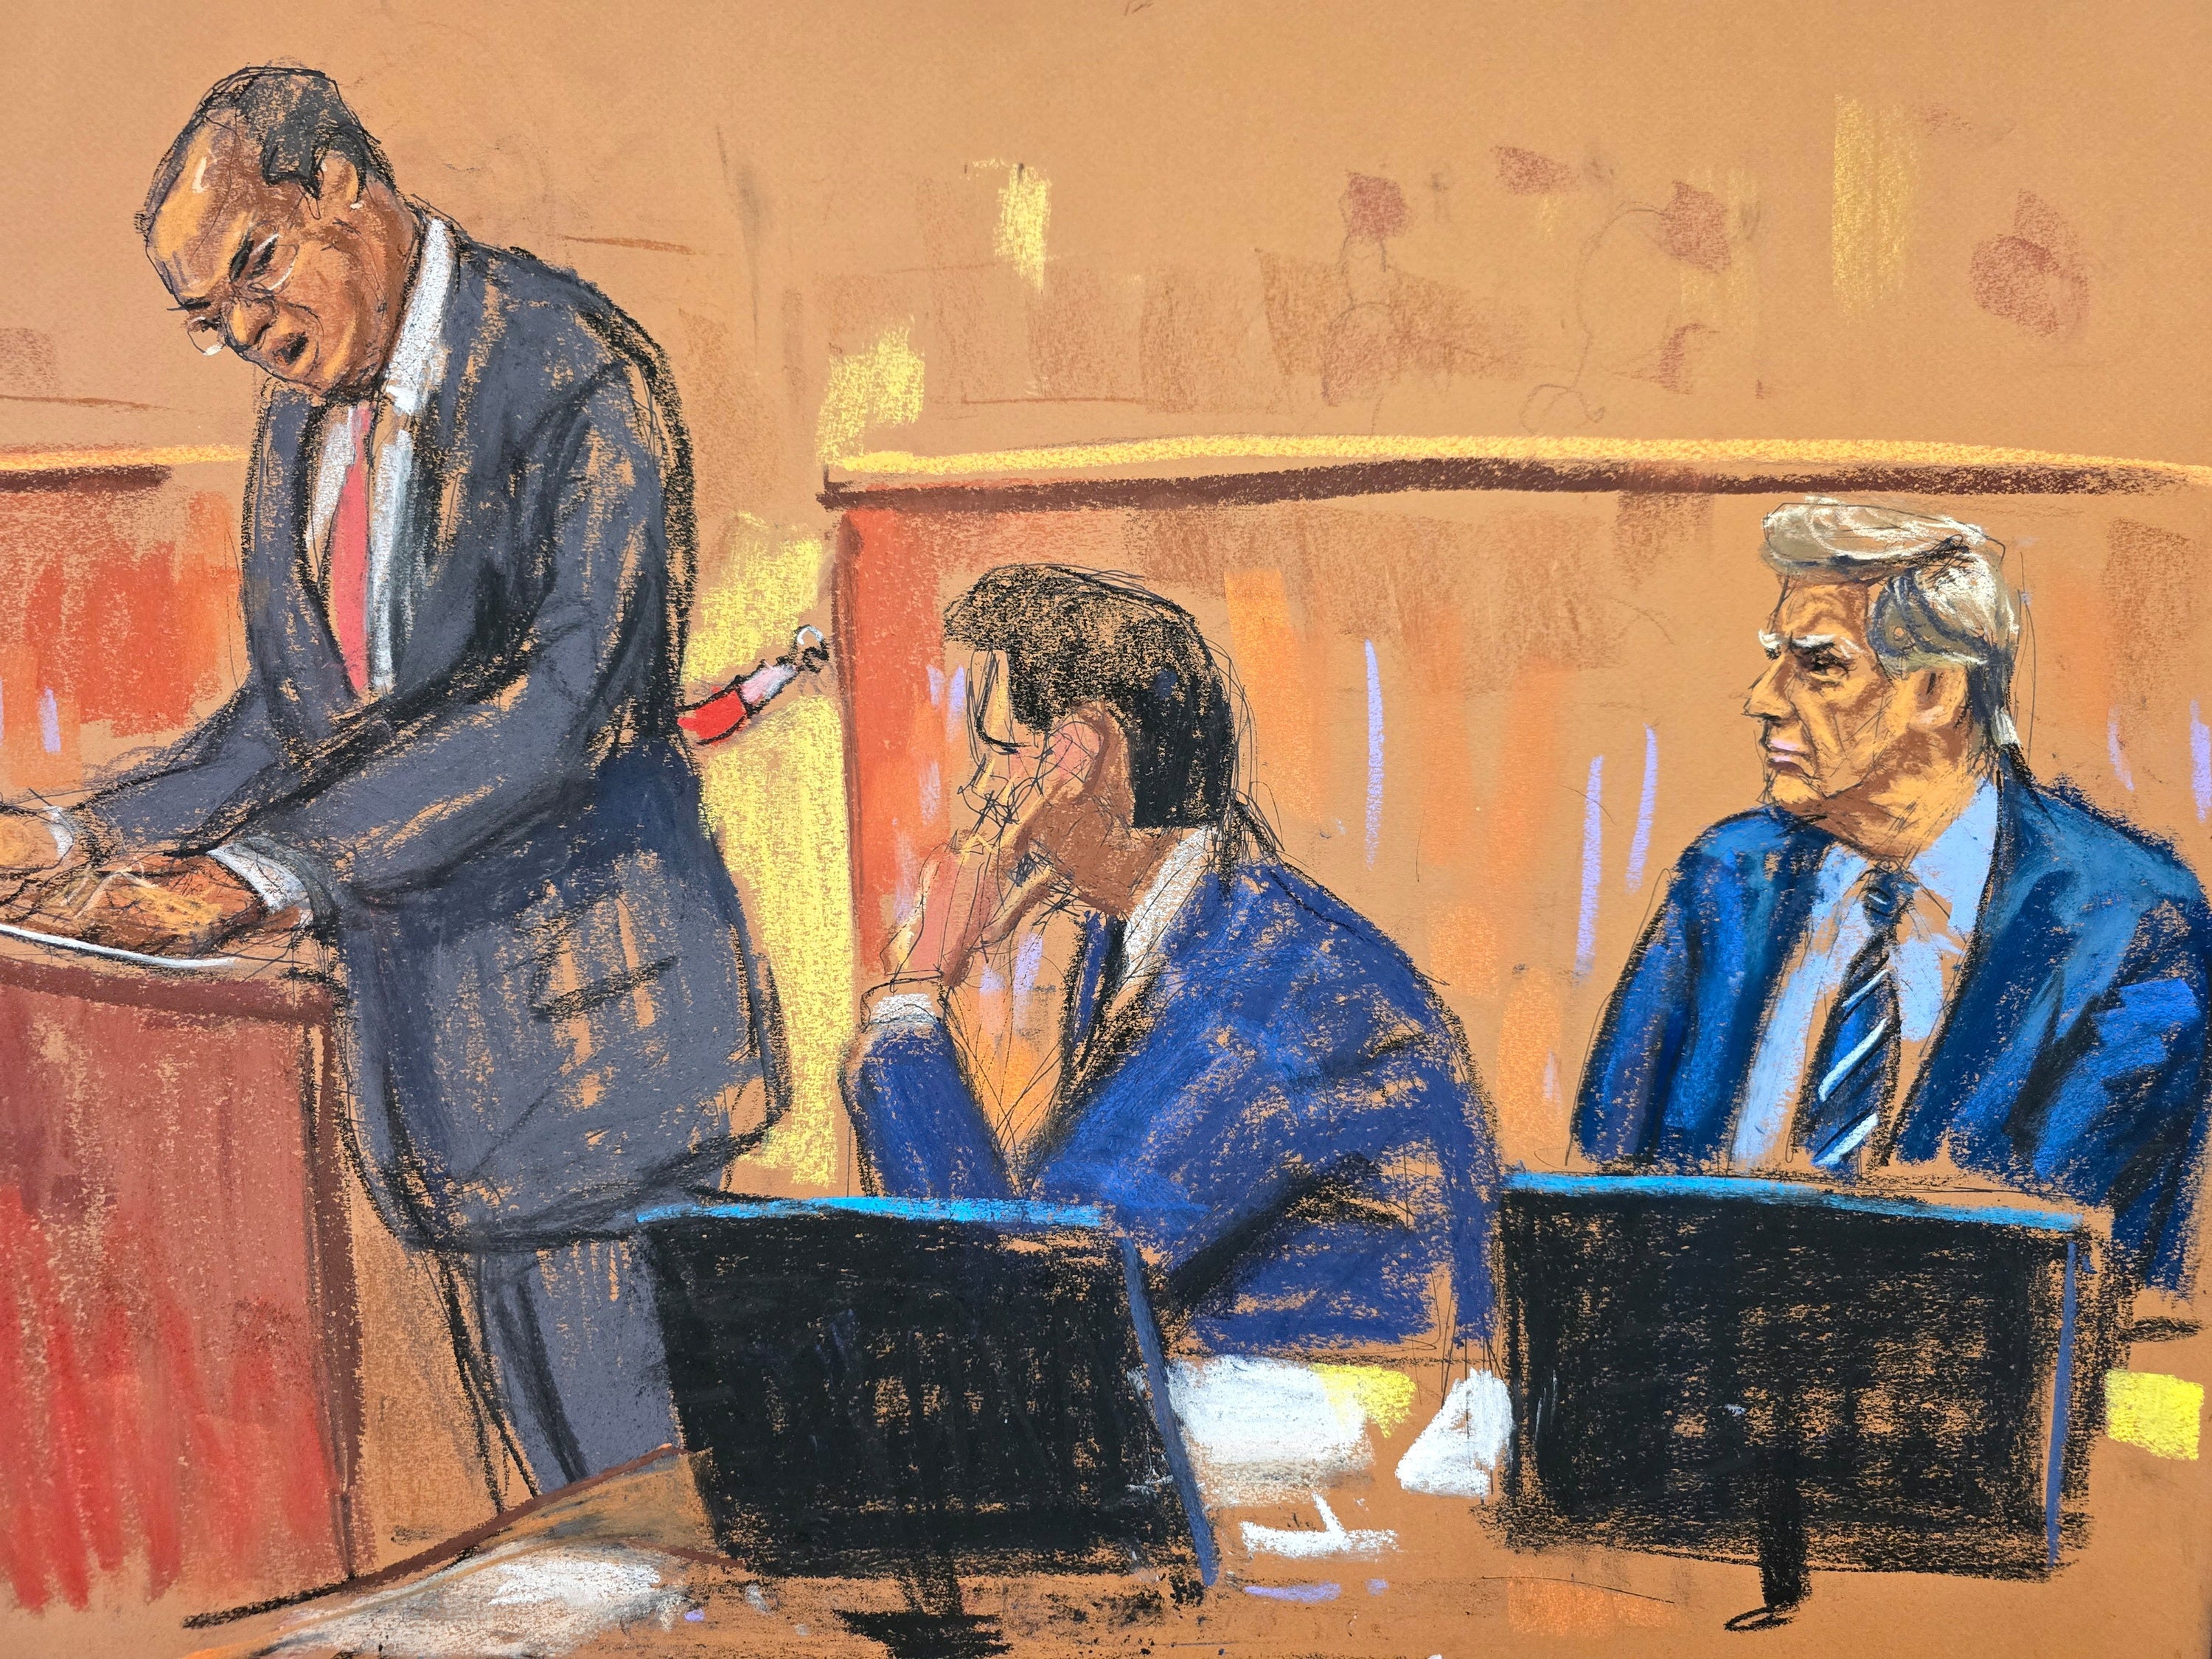 A courtroom sketch depicts Donald Trump sitting next to his attorney Todd Blanche while watching Manhattan prosecutor Joshua Steinglass inside a criminal courtoom on 16 April.